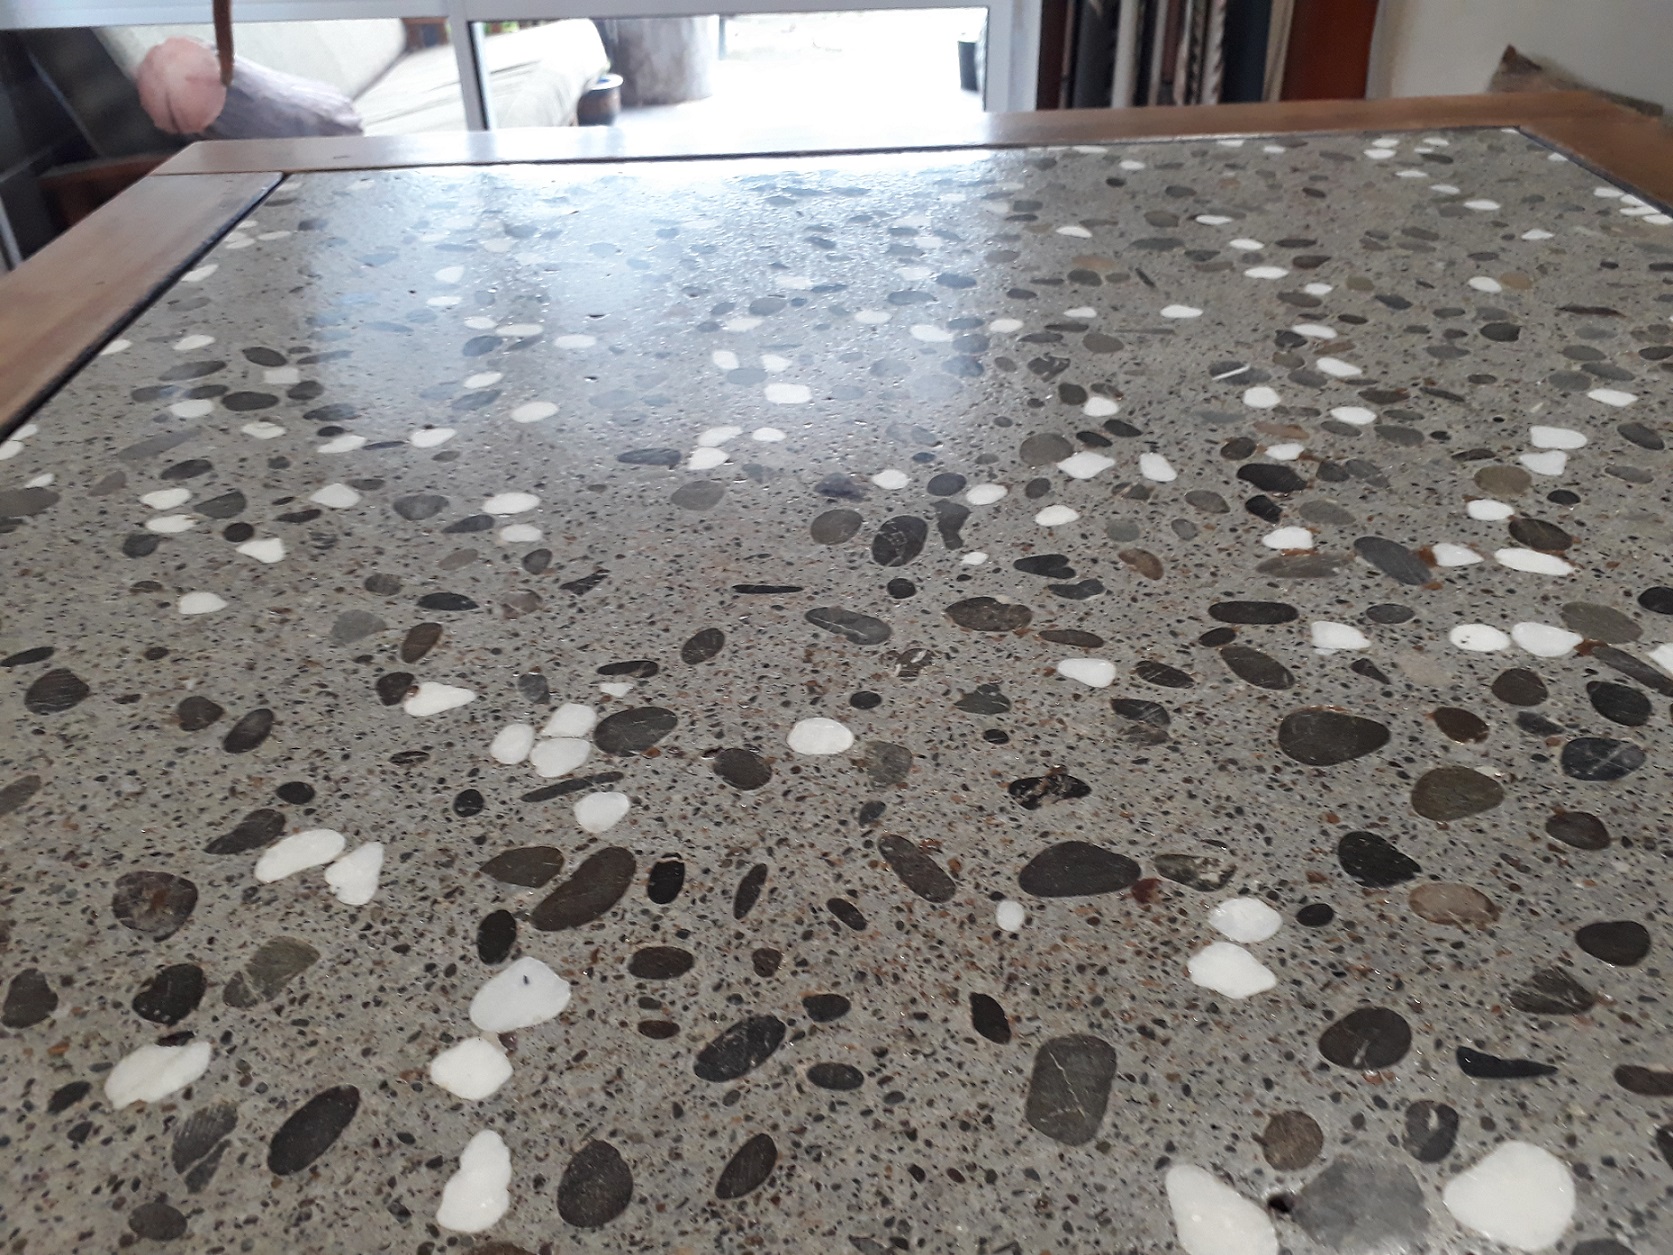 2593-bar-leaner-stone-aggregate-exposed-grind-ground-polished-concrete-christchurch.jpg